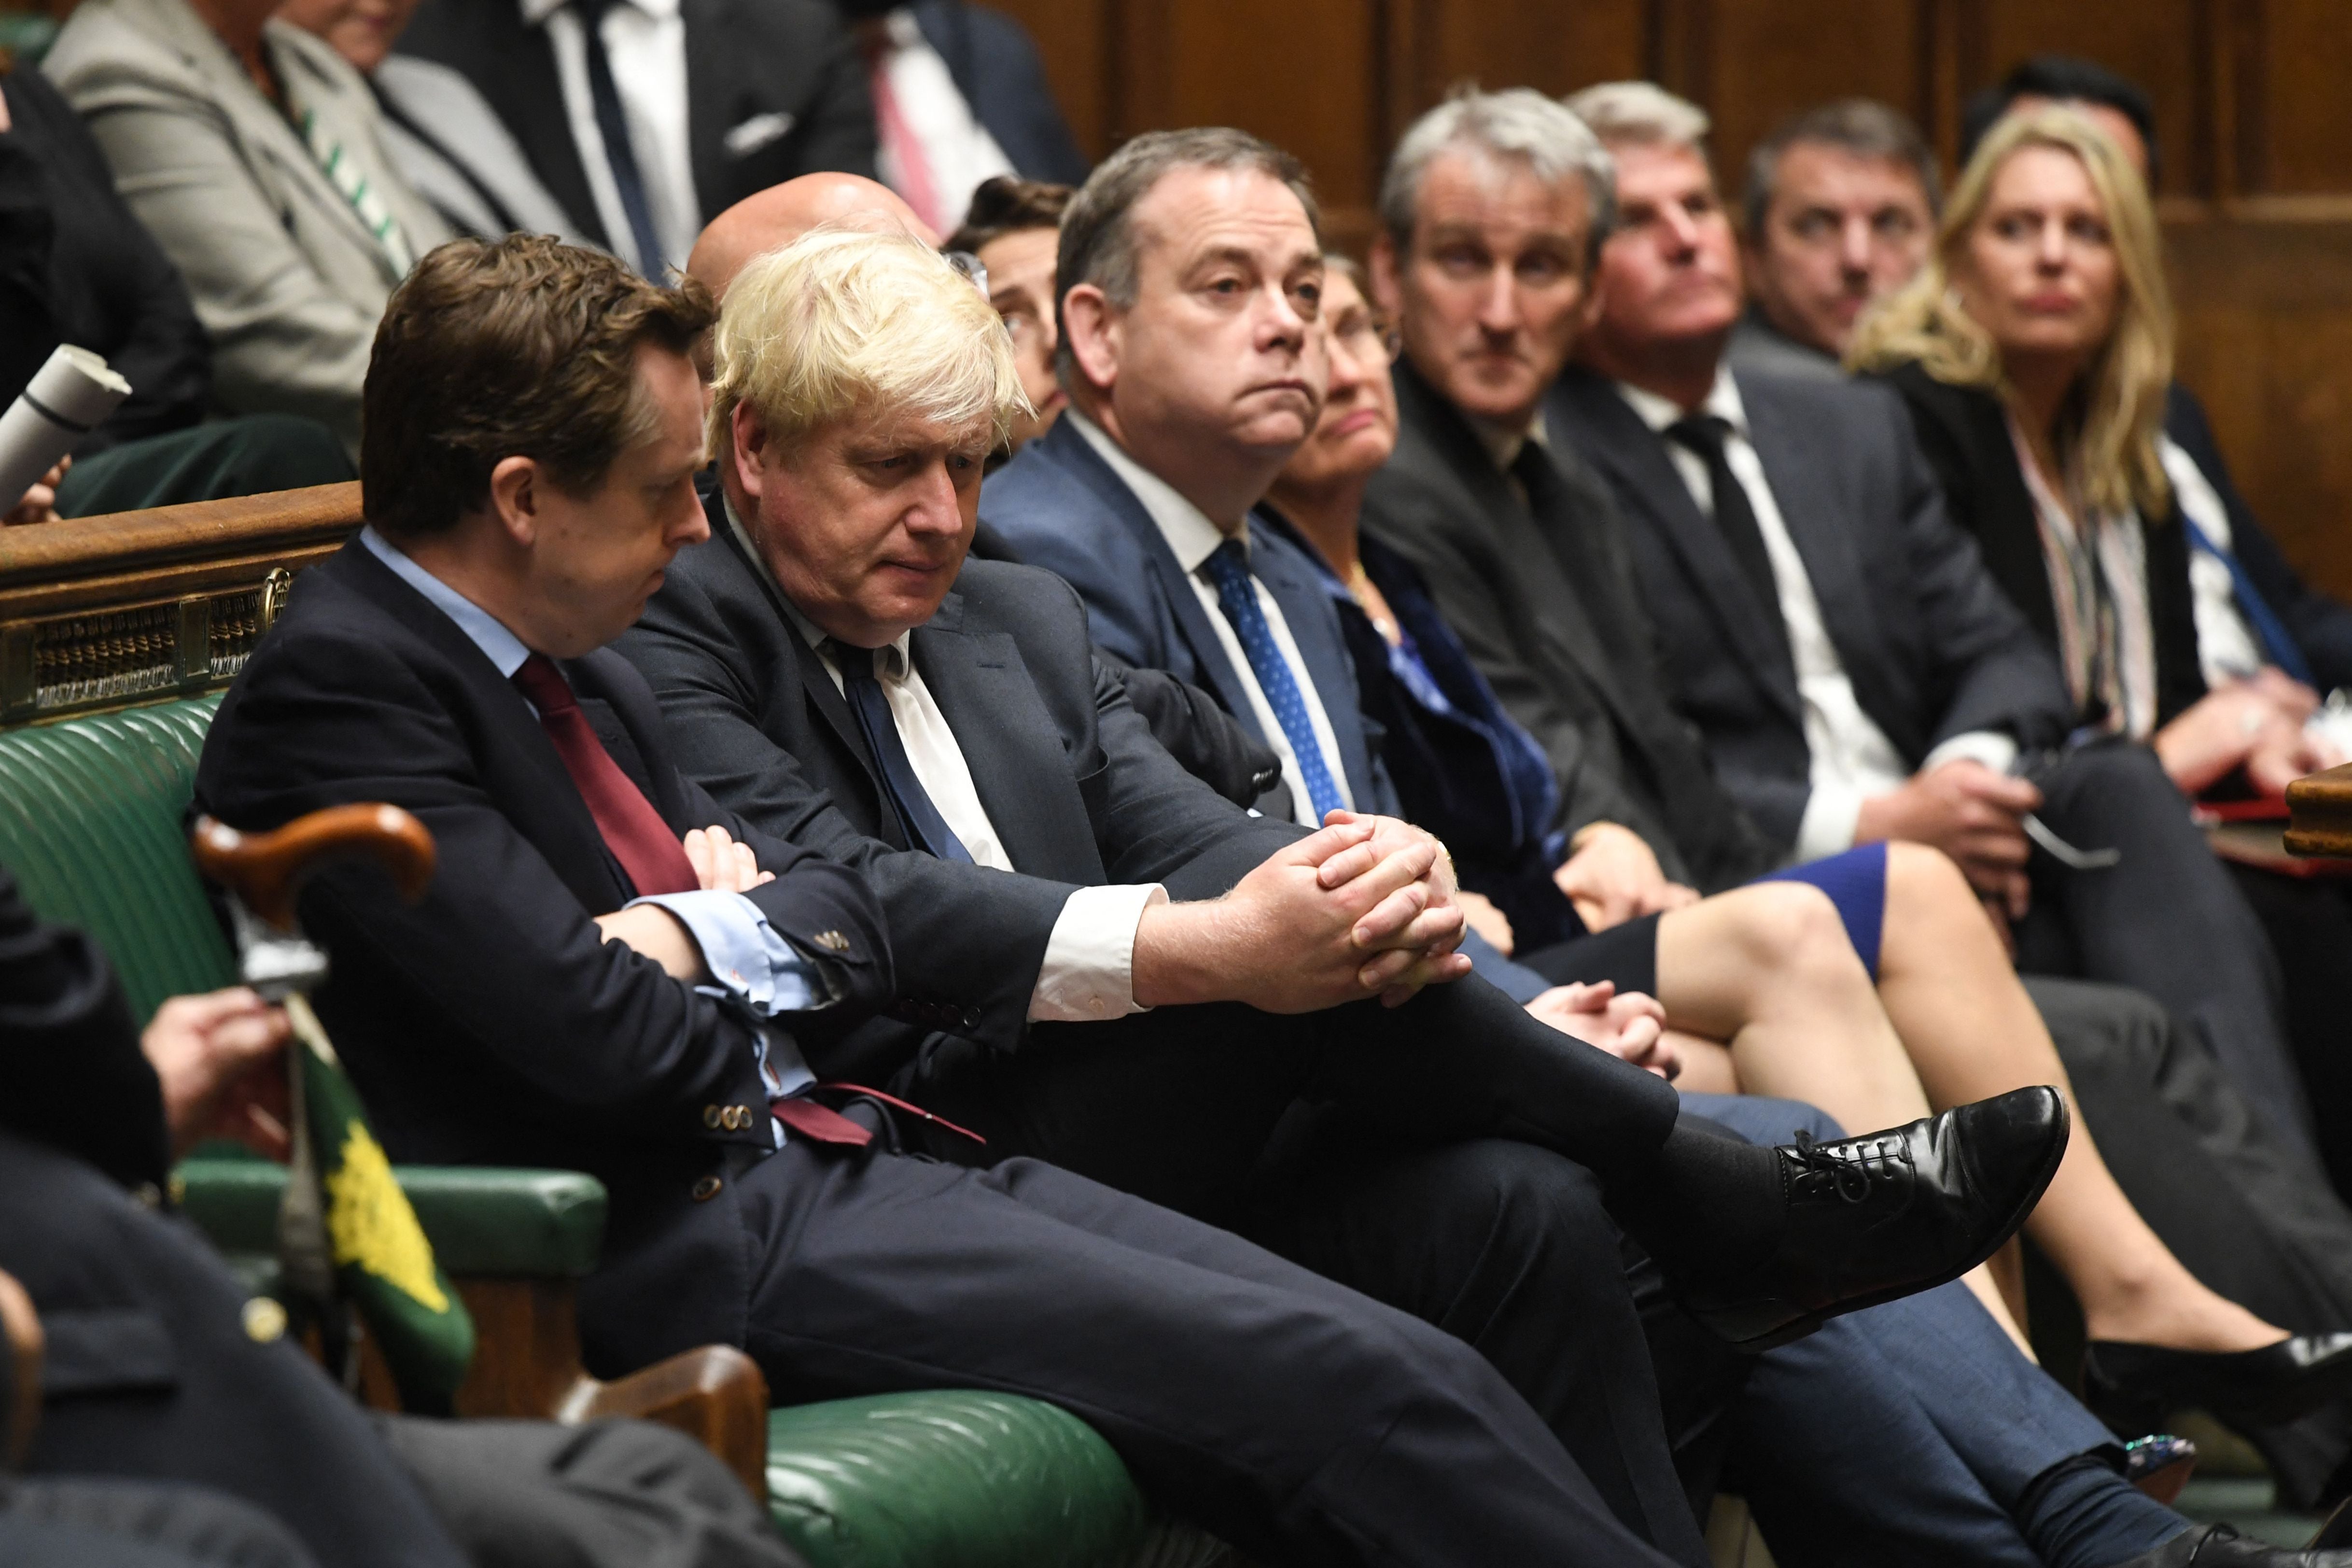 Unmasked Cabinet ministers surrounded Boris Johnson in the Commons for Prime Minister’s Questions